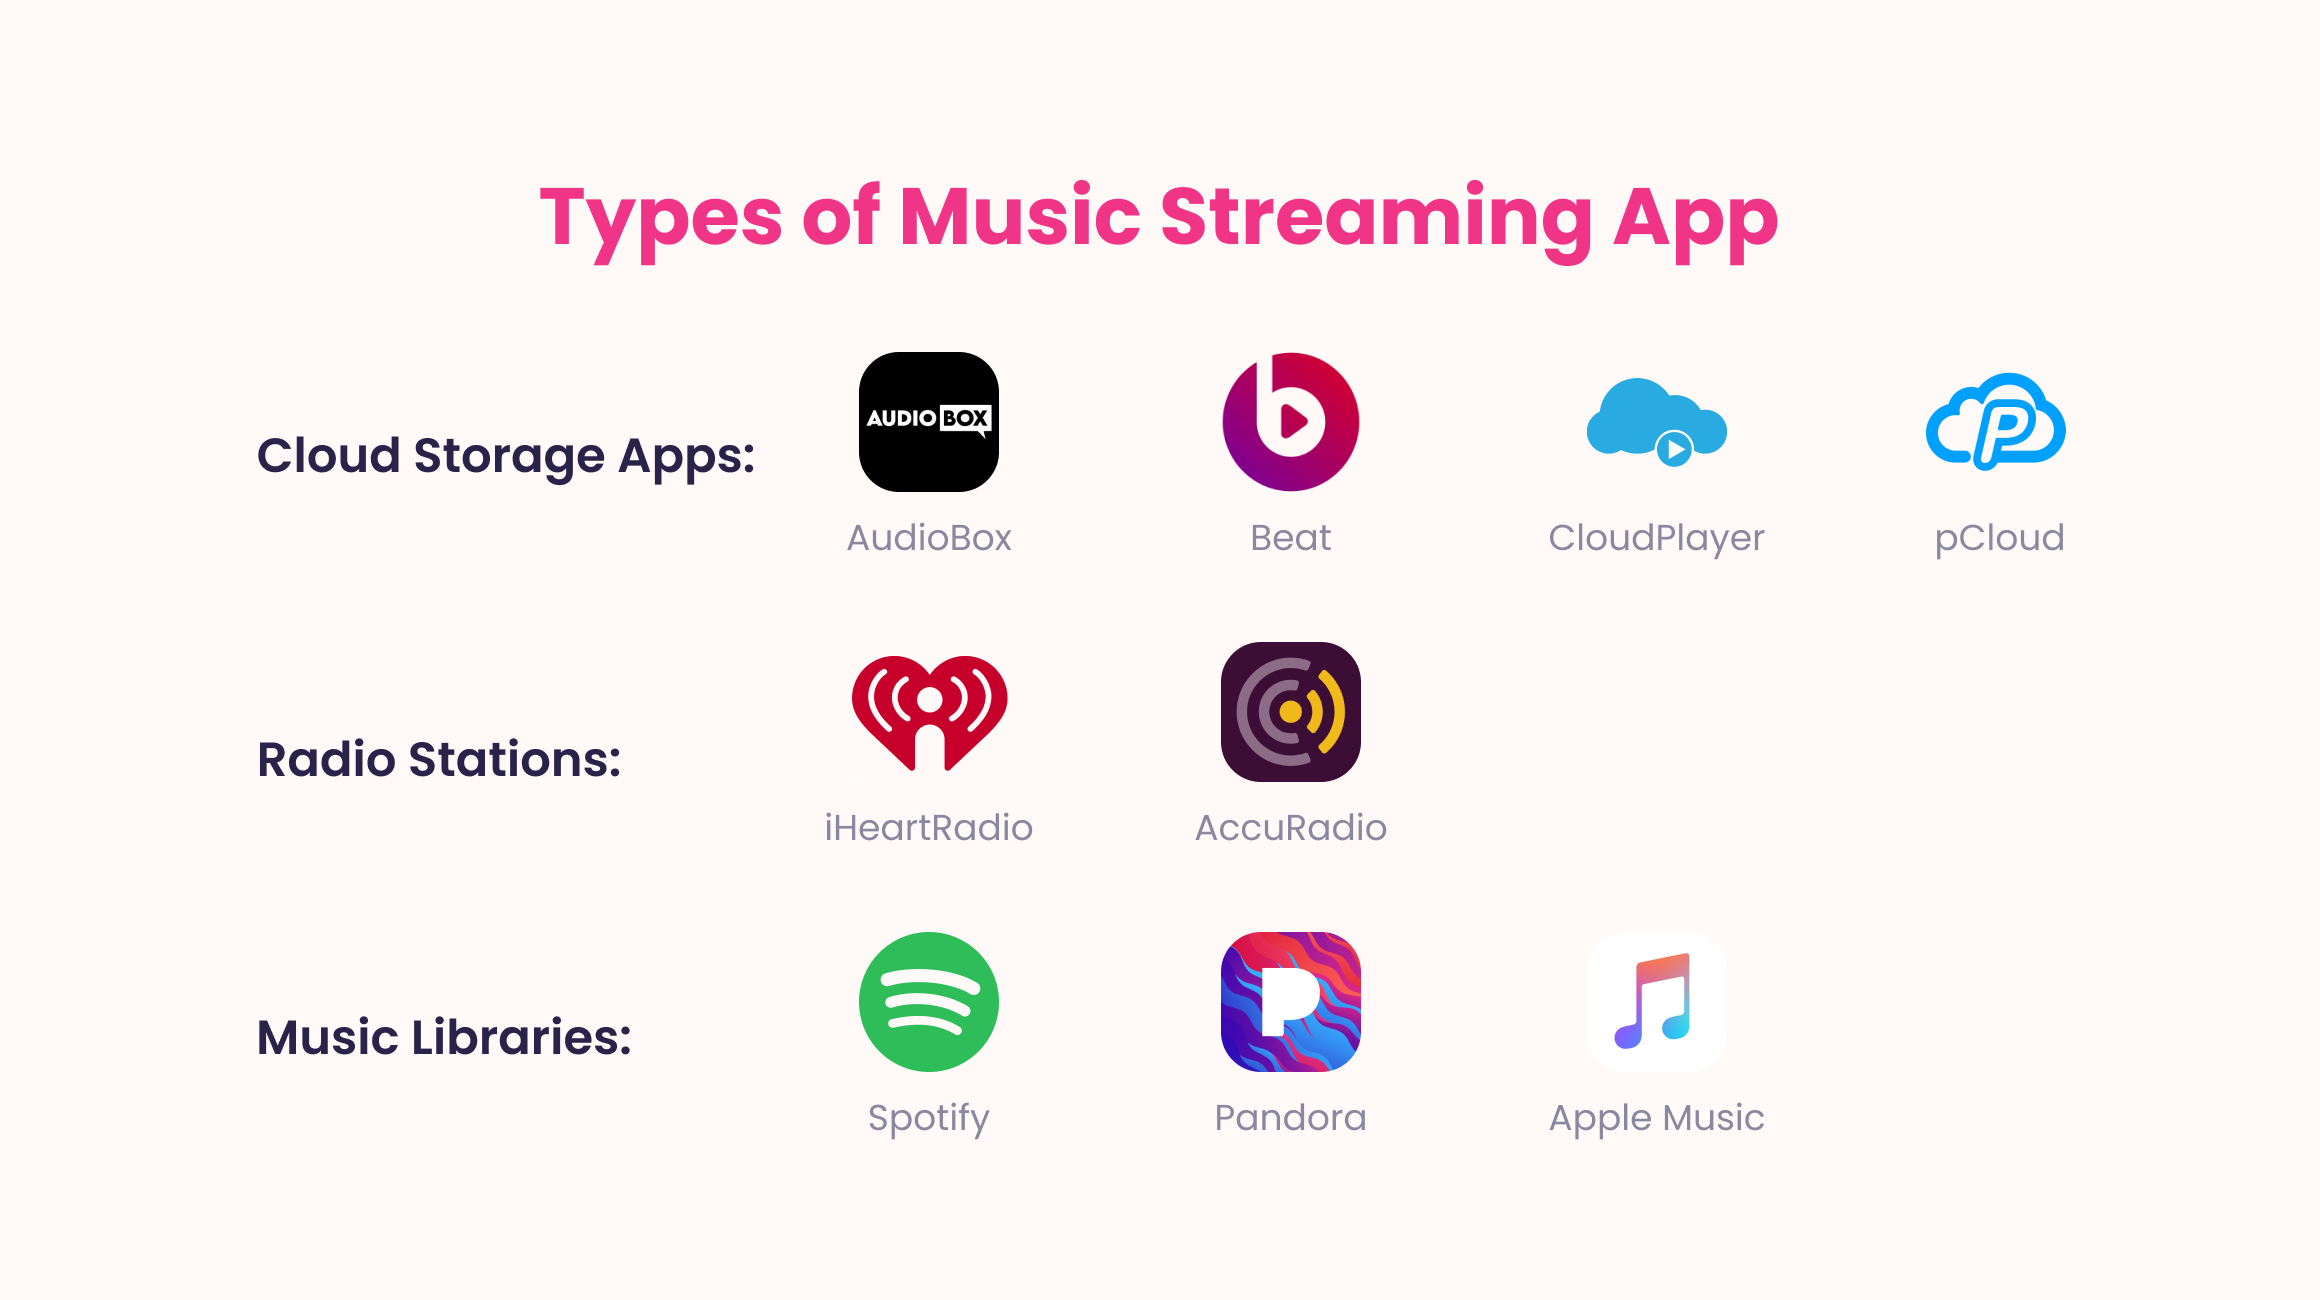 Types of music apps